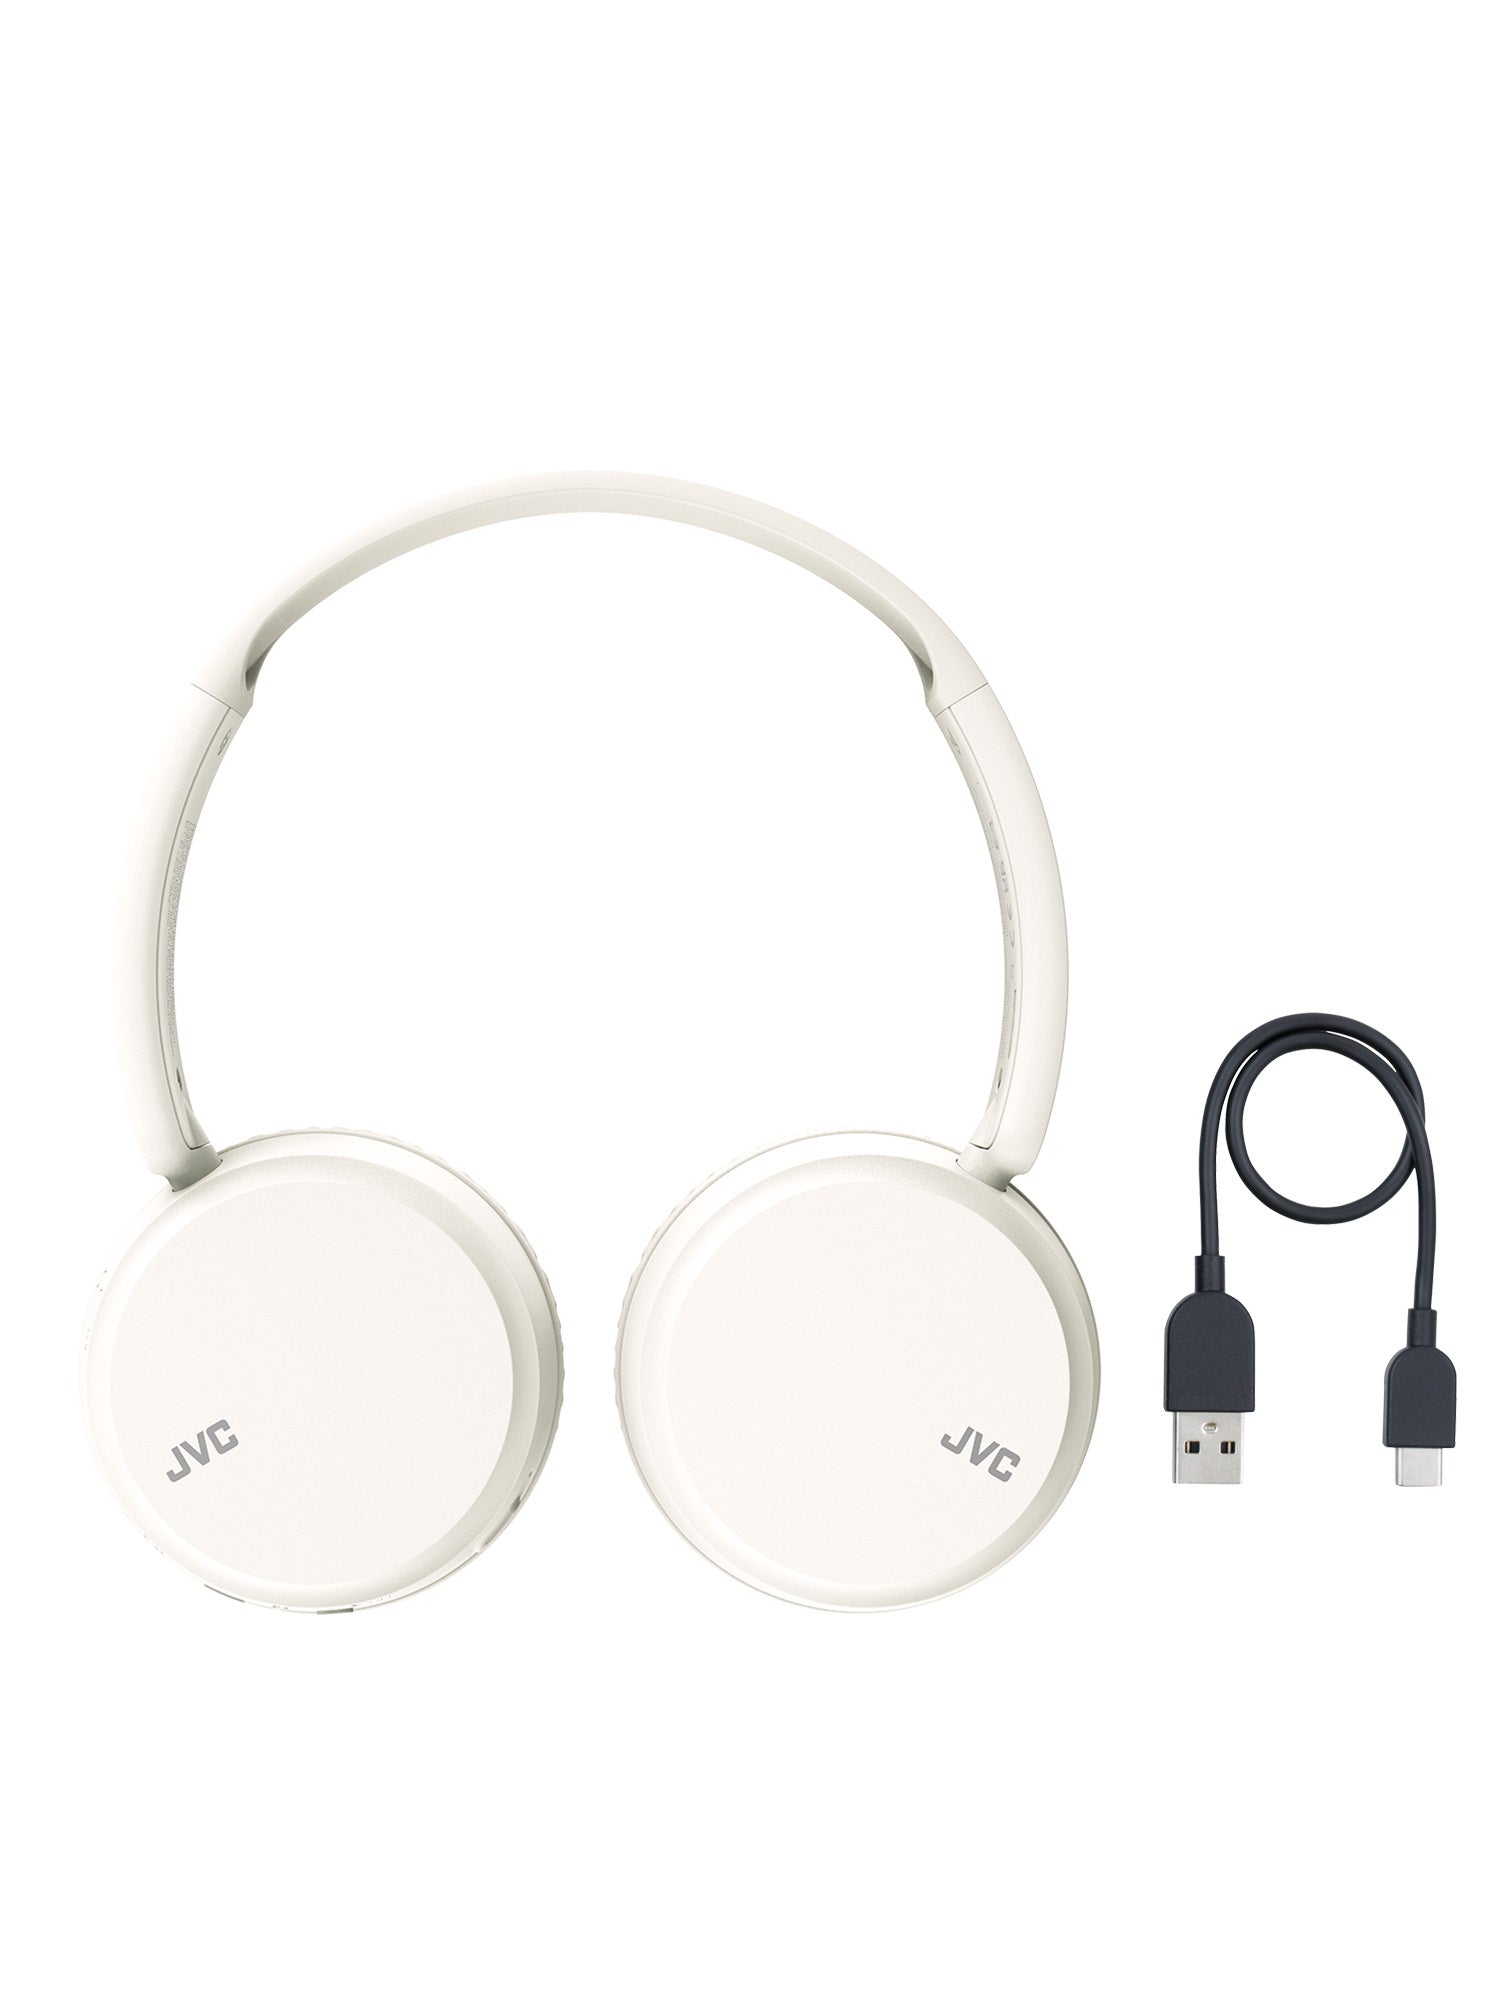 HA-S36W-W in white bluetooth headphones USB charger lead